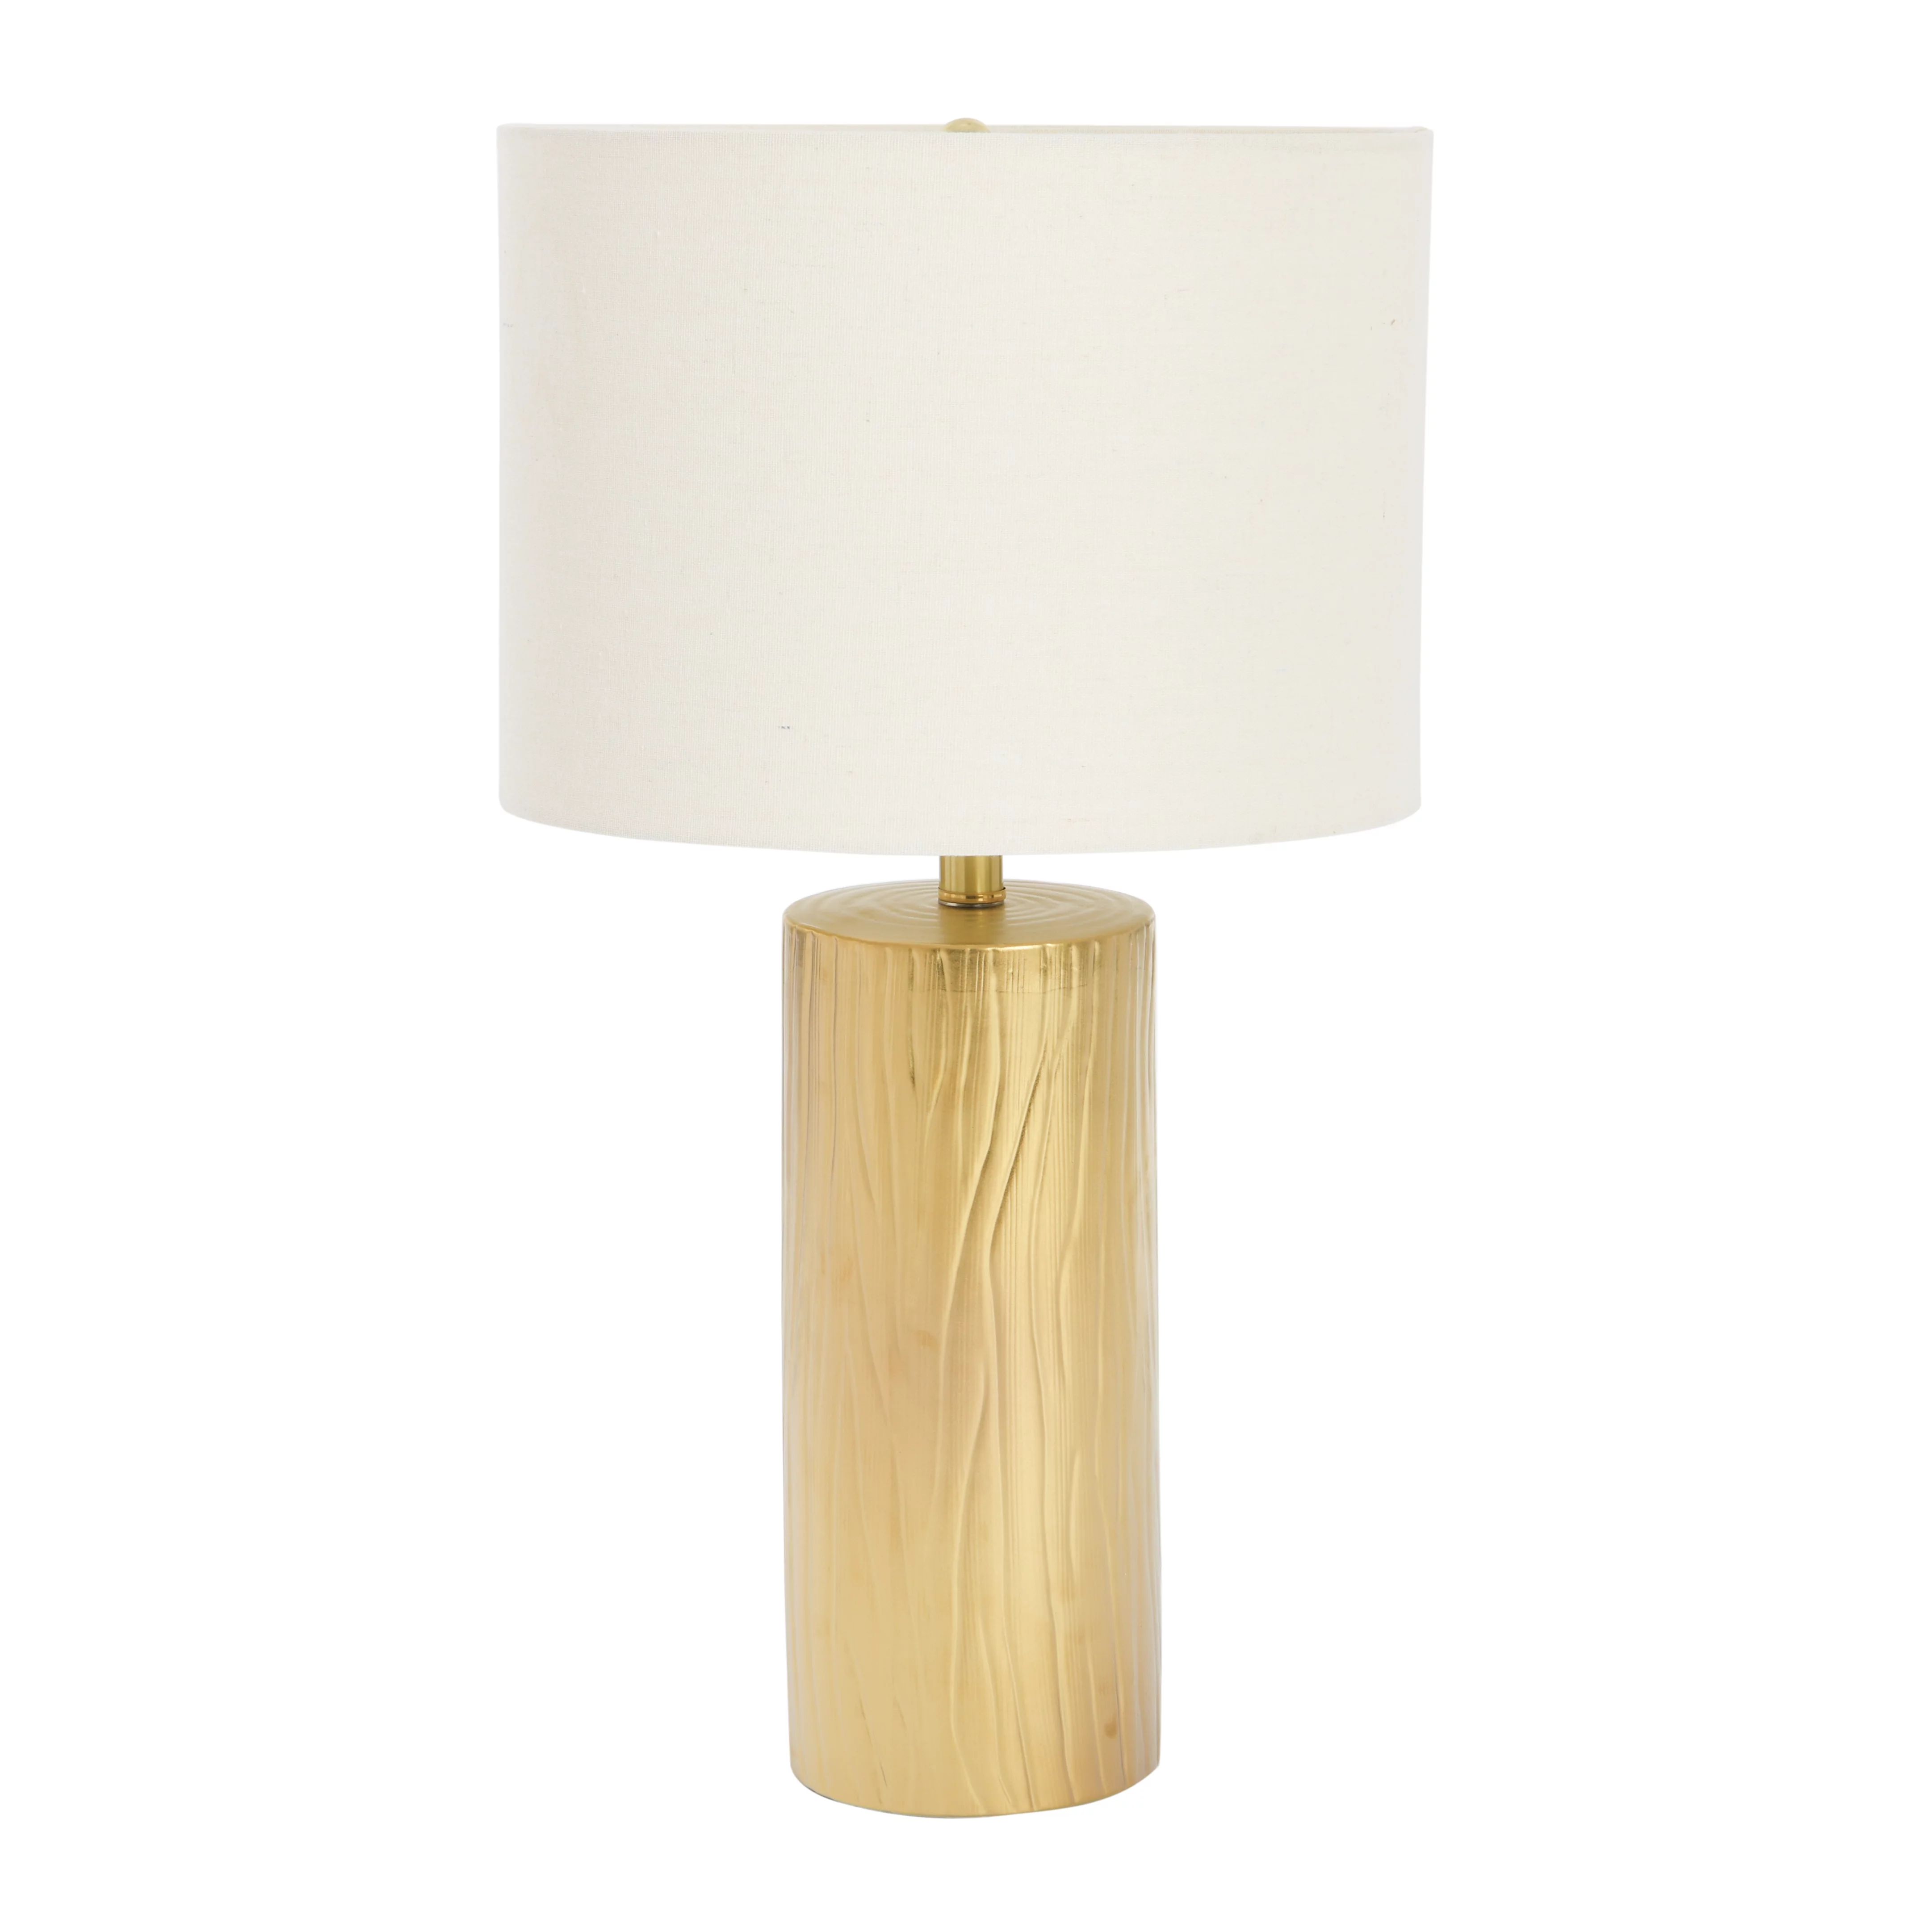 Ember Interiors Gold Stoneware Table Lamp with Cream Linen Shade, 14" x 25" | Walmart (US)